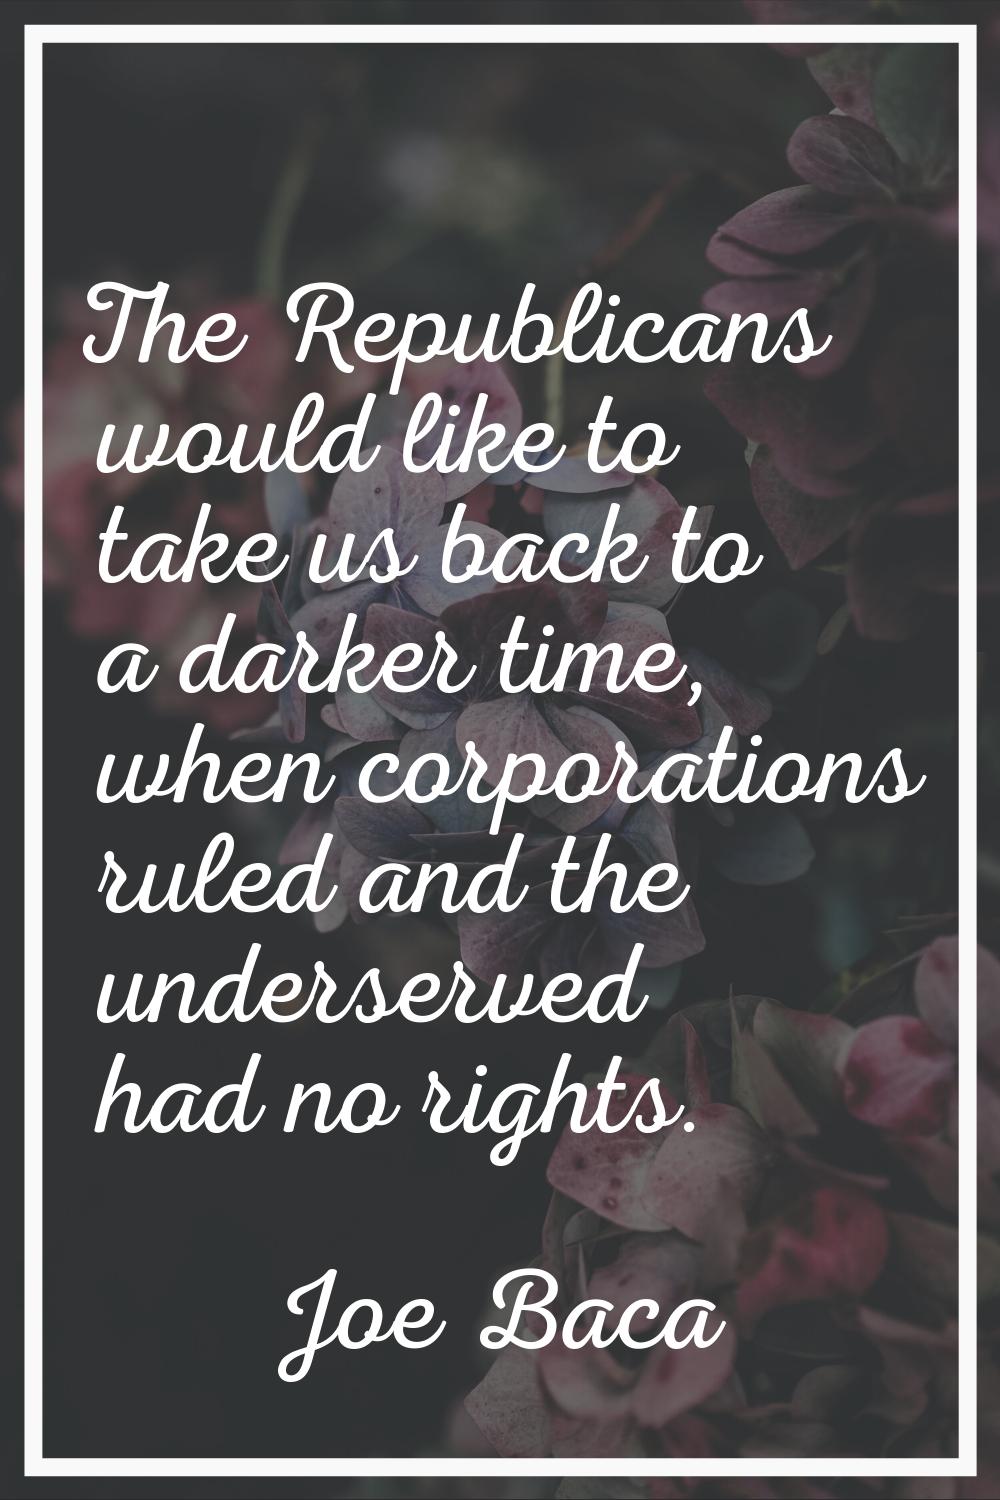 The Republicans would like to take us back to a darker time, when corporations ruled and the unders